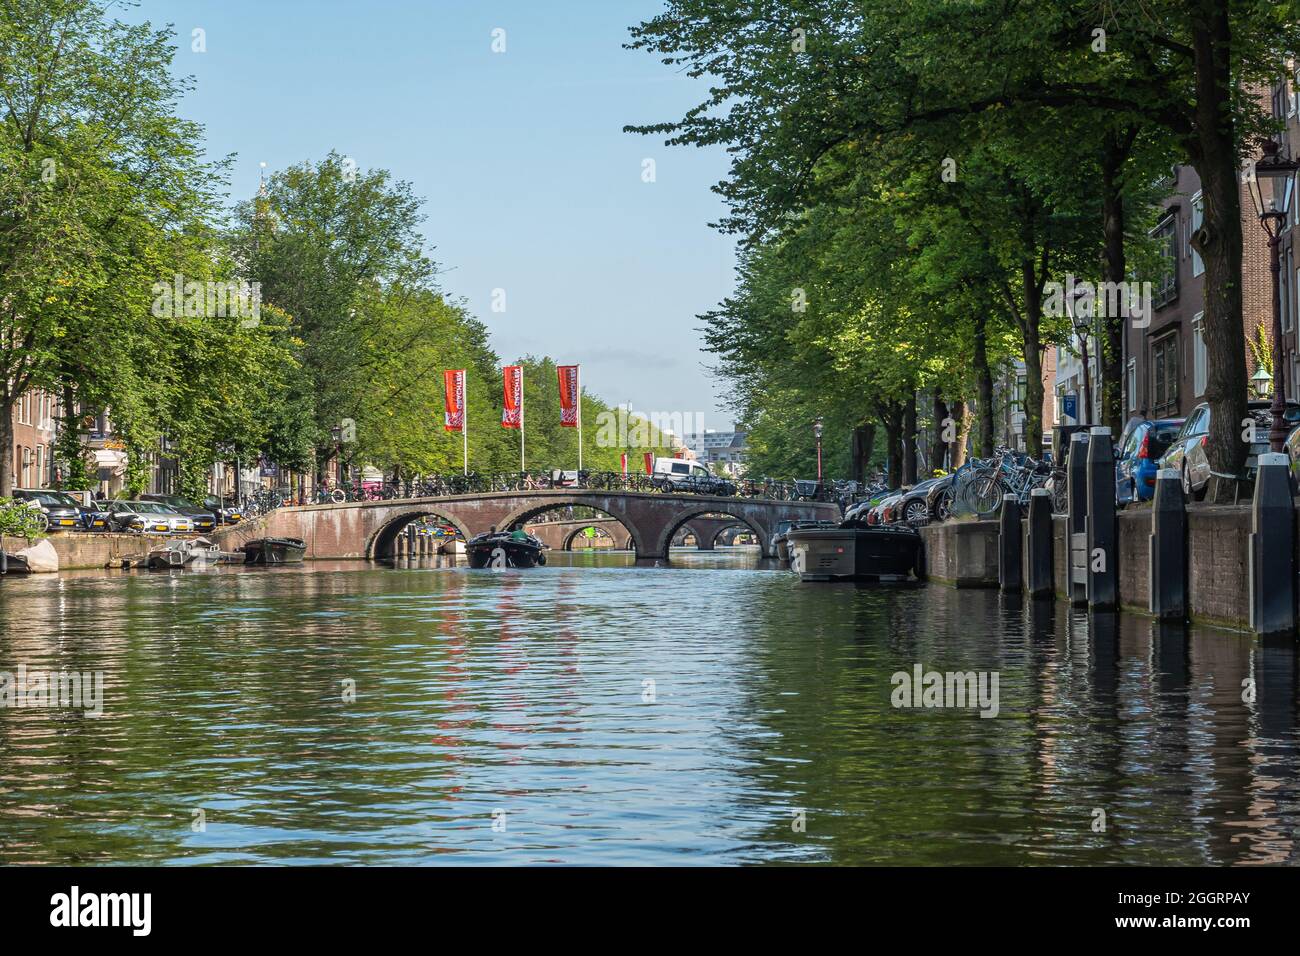 Amsterdam, Netherlands August 15, 2021: Stone bridge with 3 arches over wider canal green foliage and parked cars on both shores under blue sky Stock Photo - Alamy